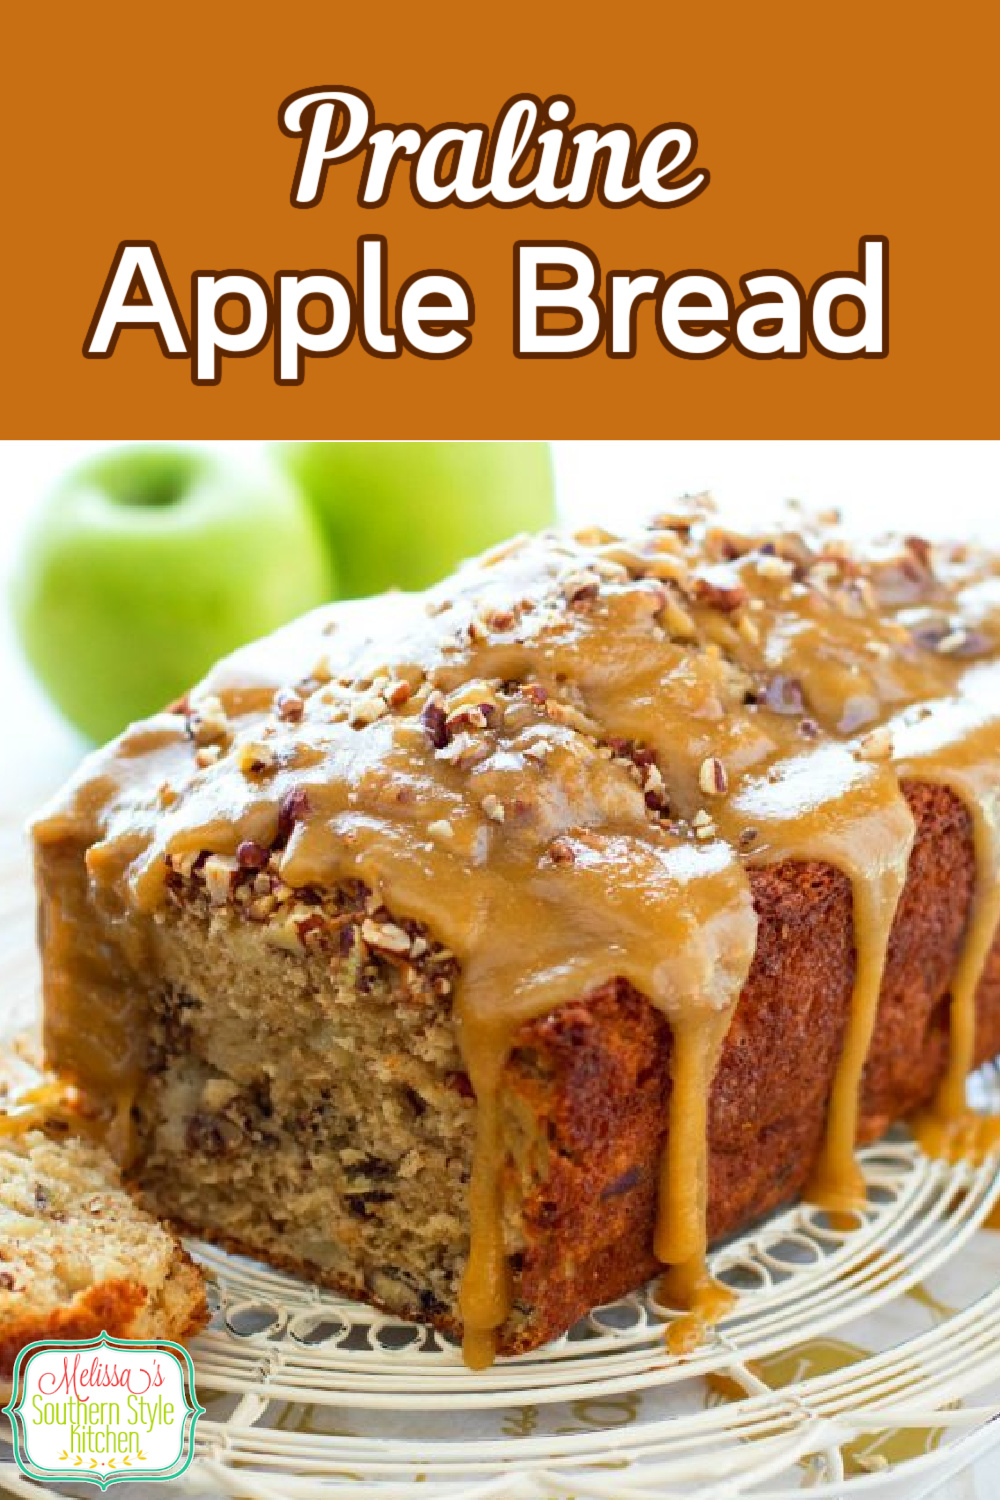 This decadent Praline Apple Bread is the epitome of indulgence. Enjoy it for breakfast, brunch or as a mid-morning treat #applebread #pralineapplebread #apples #applerecipes #harvestapplebread #quickbreadrecipes #brunch #breakfast #holidaybaking #fallrecipes #breadrecipes #apple #southernfood #southernrecipes via @melissasssk